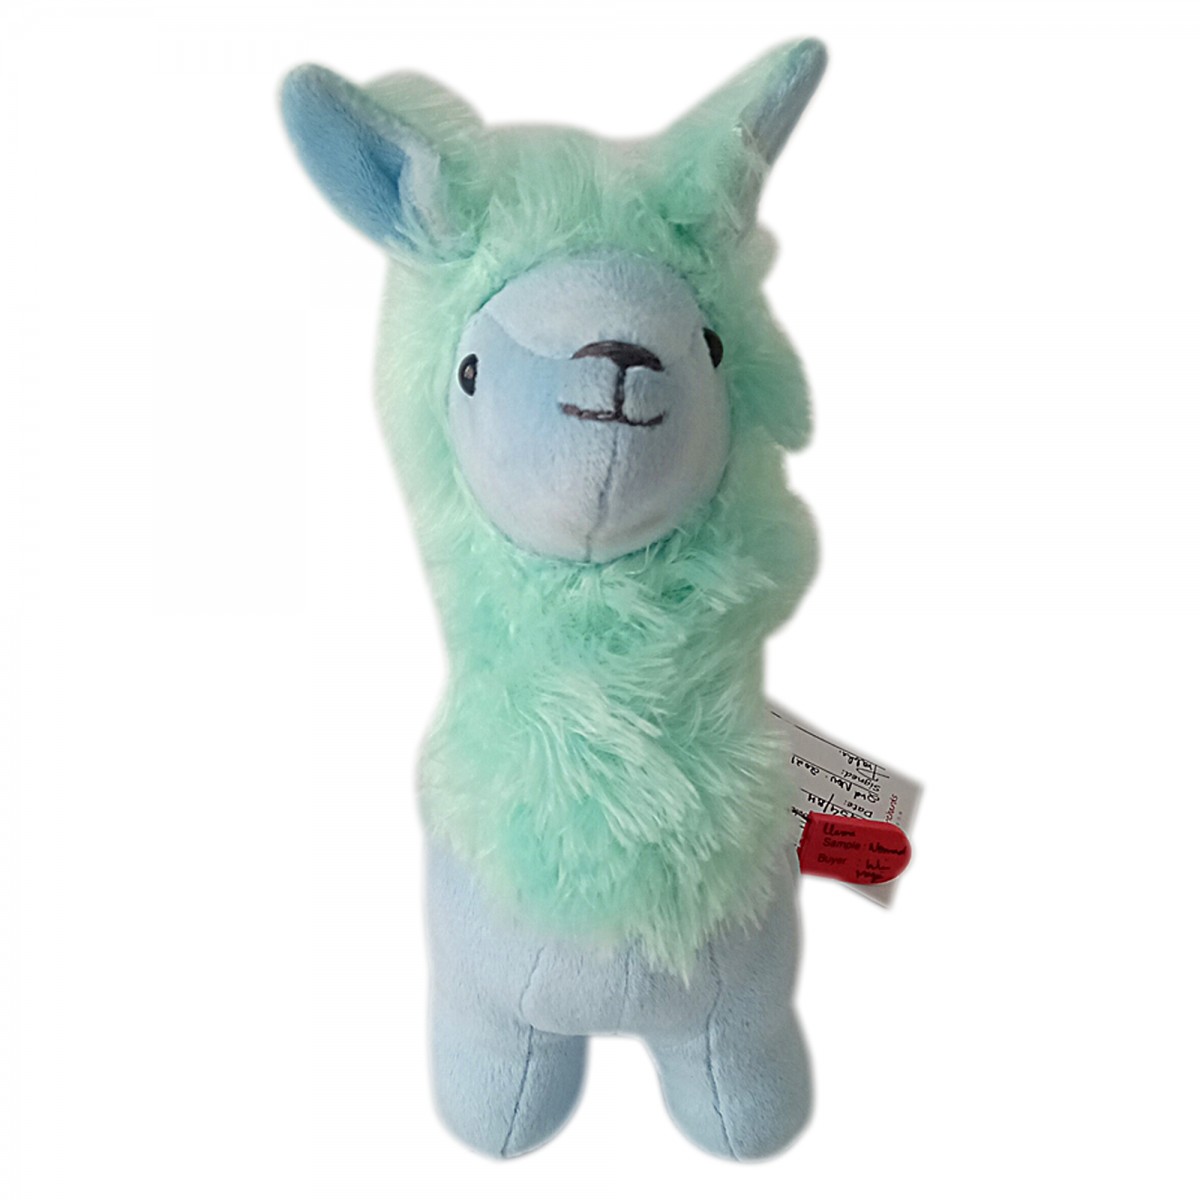 Furrendz Groovy Green Llama 10" Plush for Kids 1 Year and Above